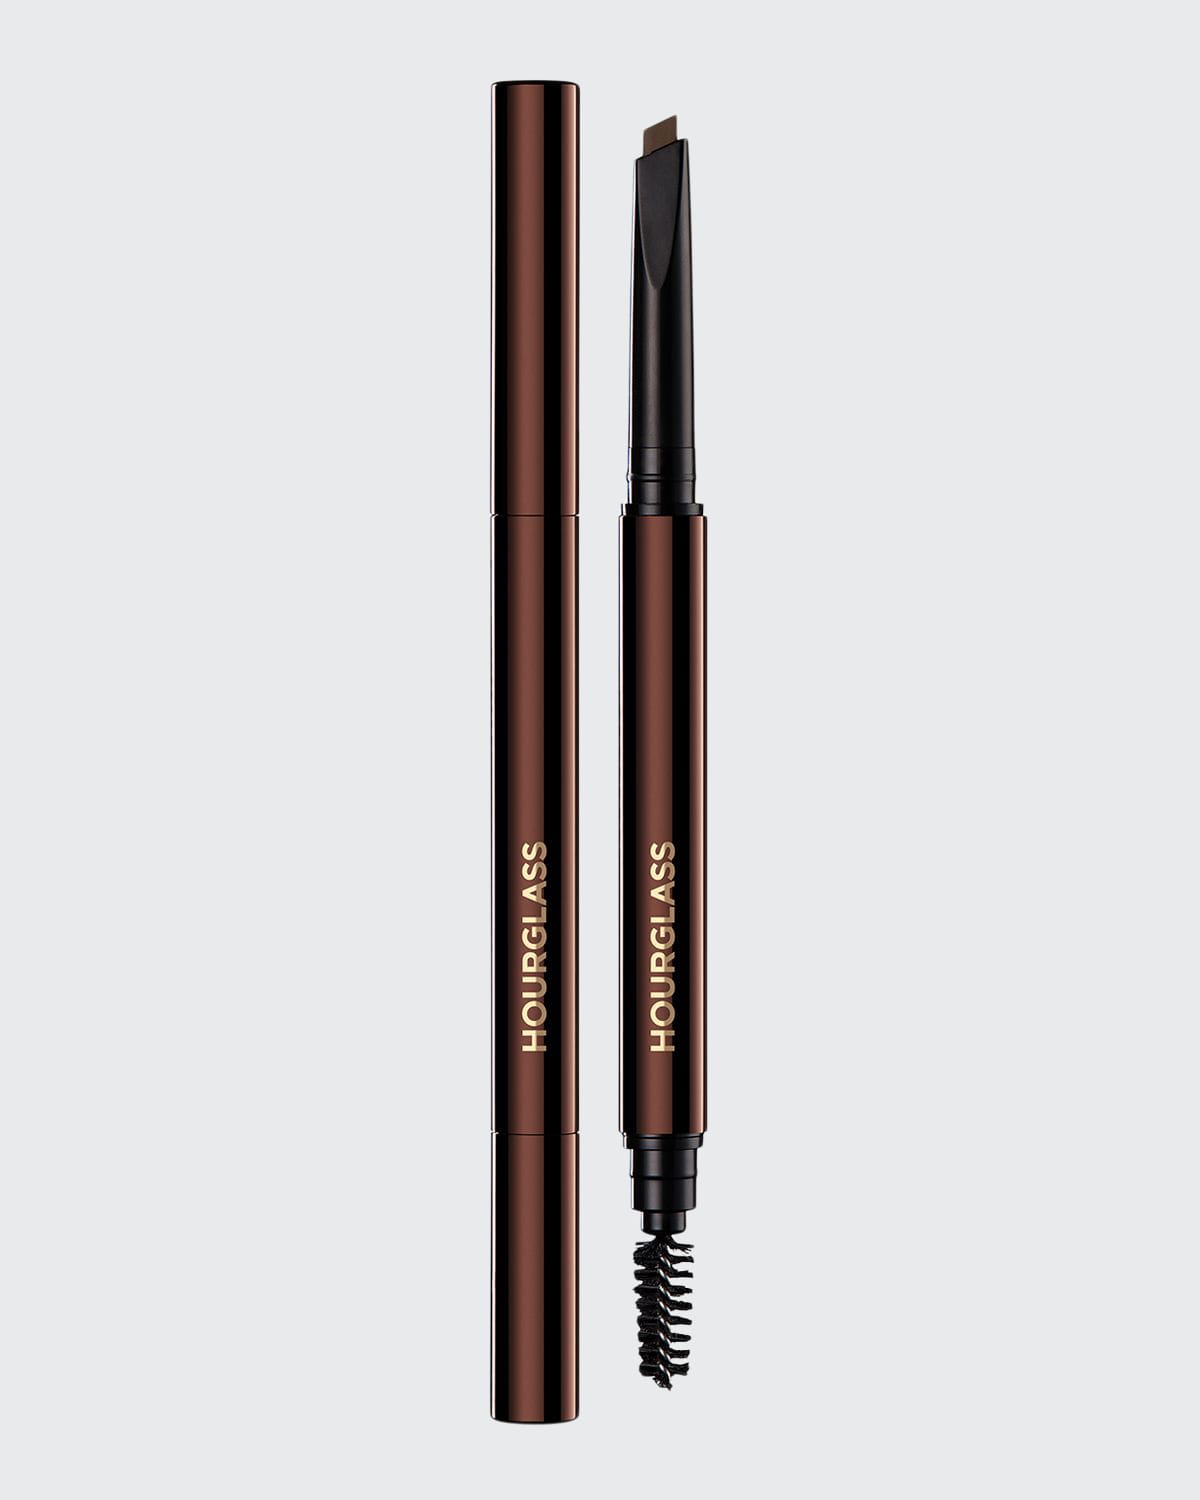 Hourglass Cosmetics Arch Brow Sculpting Pencil